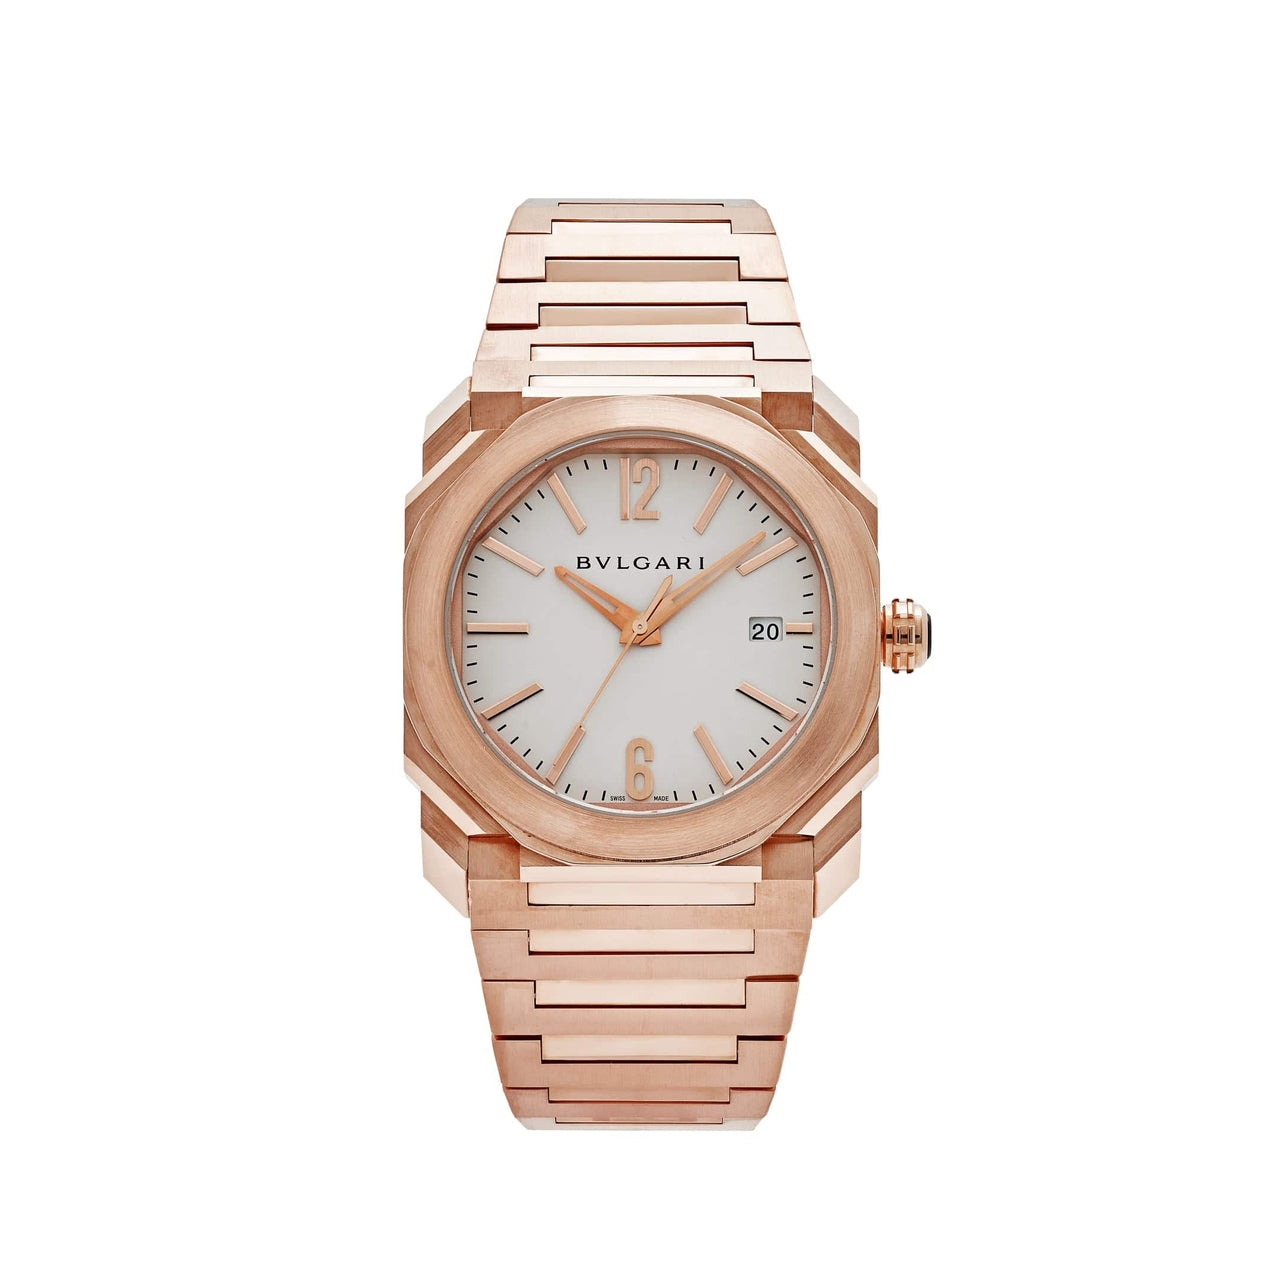 BVLGARI Octo Automatic 102318 Rose Gold Silver Dial